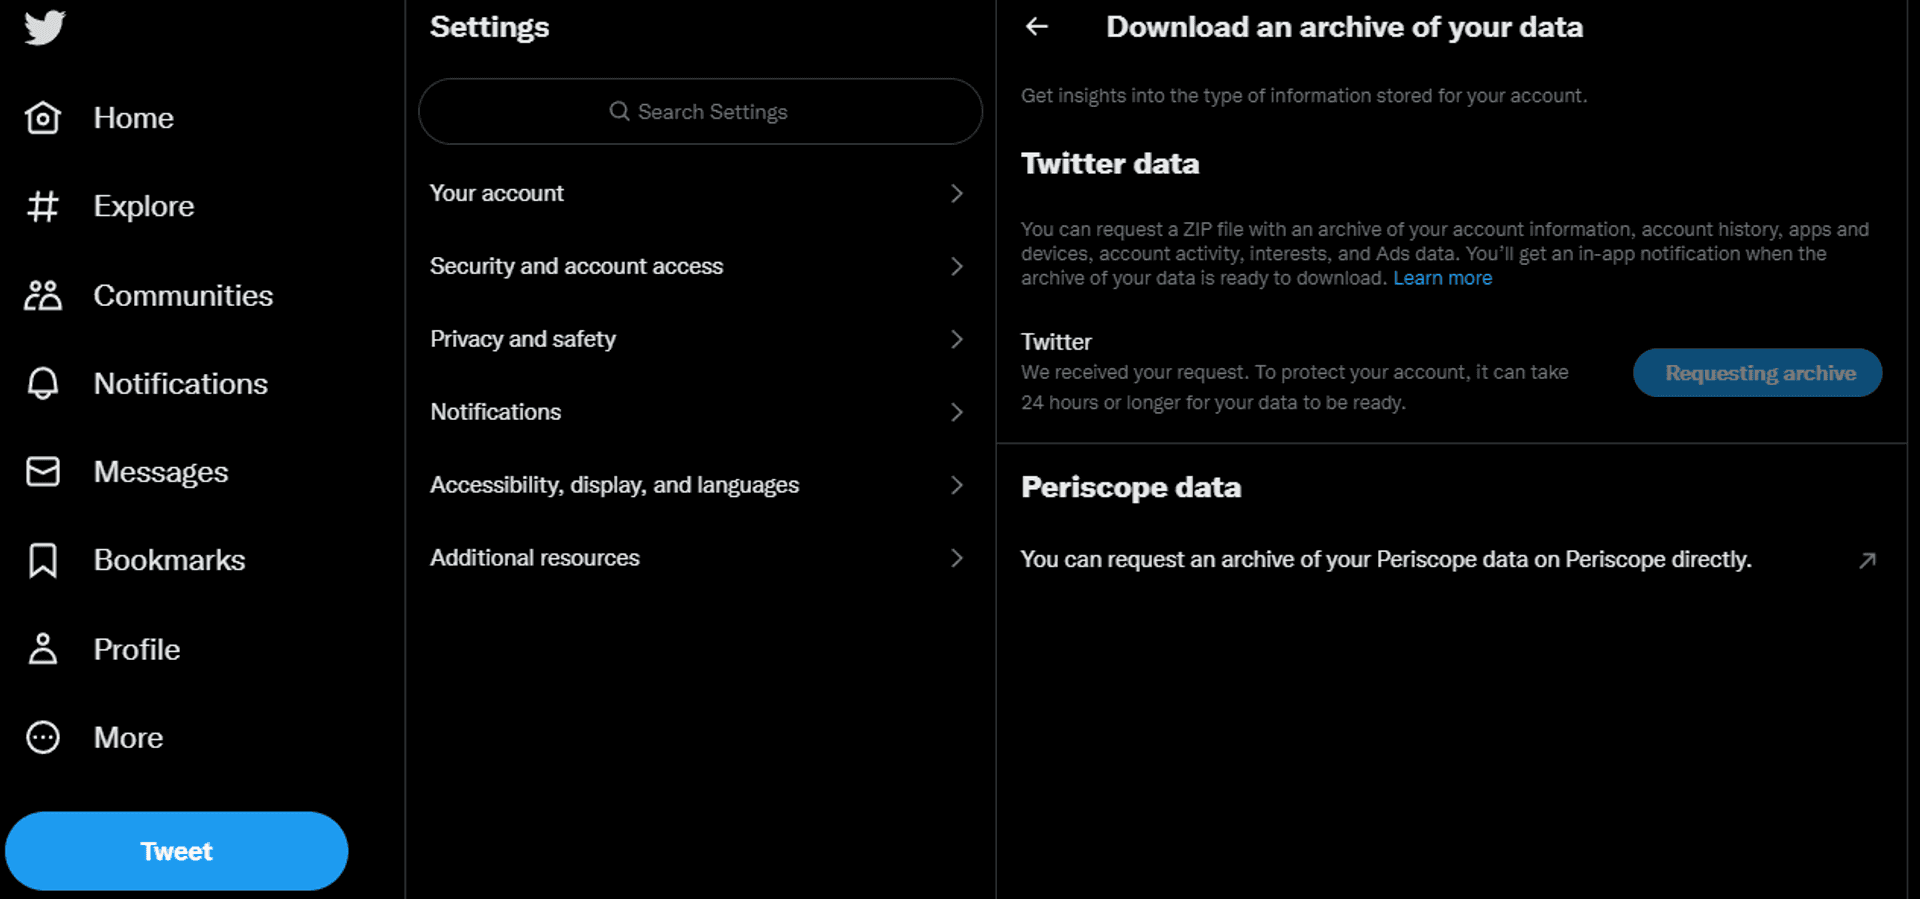 Twitter settings page after requesting your archive